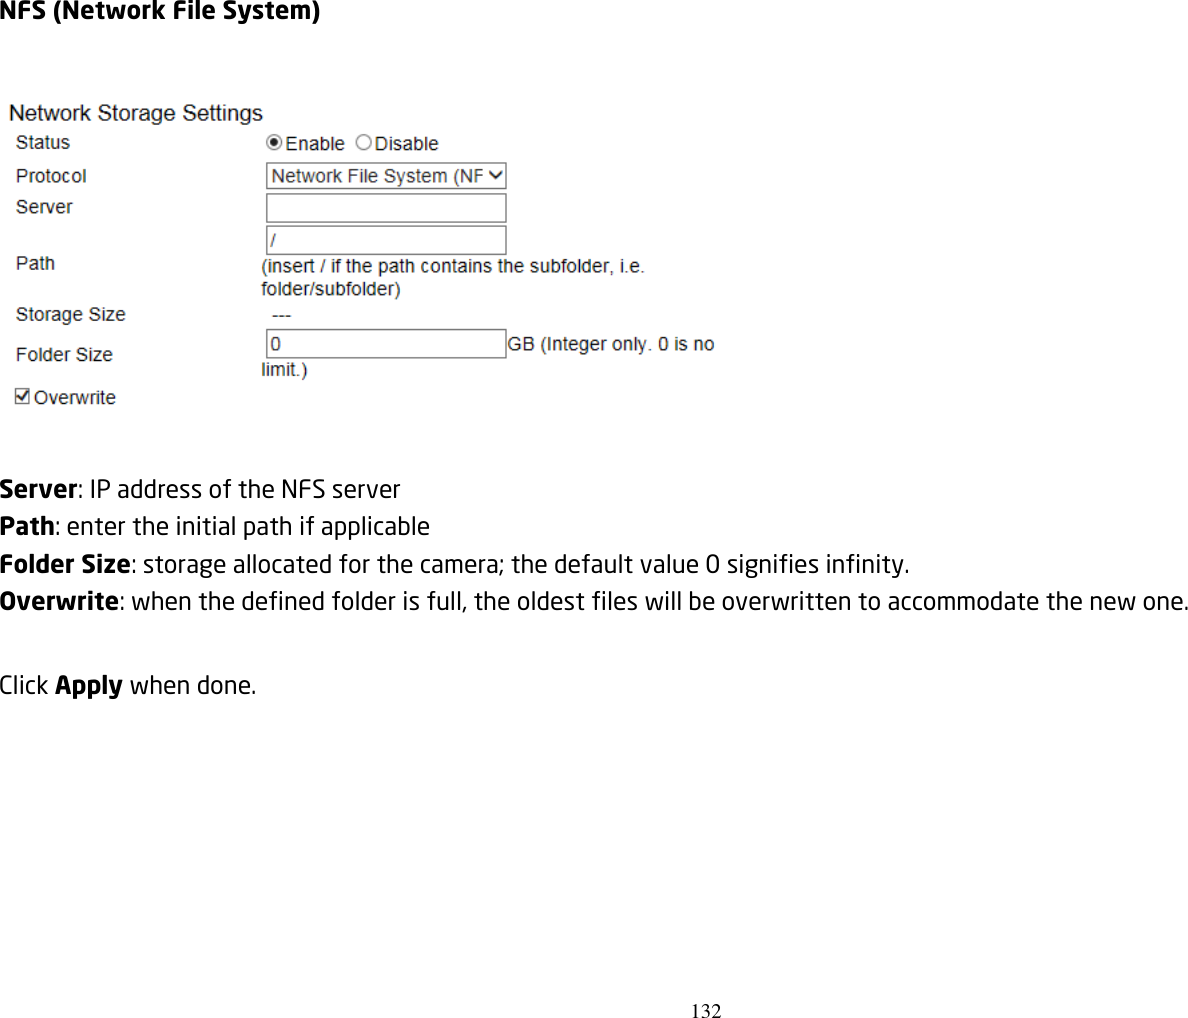 132   NFS (Network File System)    Server: IP address of the NFS server Path: enter the initial path if applicable   Folder Size: storage allocated for the camera; the default value 0 signifies infinity. Overwrite: when the defined folder is full, the oldest files will be overwritten to accommodate the new one.  Click Apply when done.       